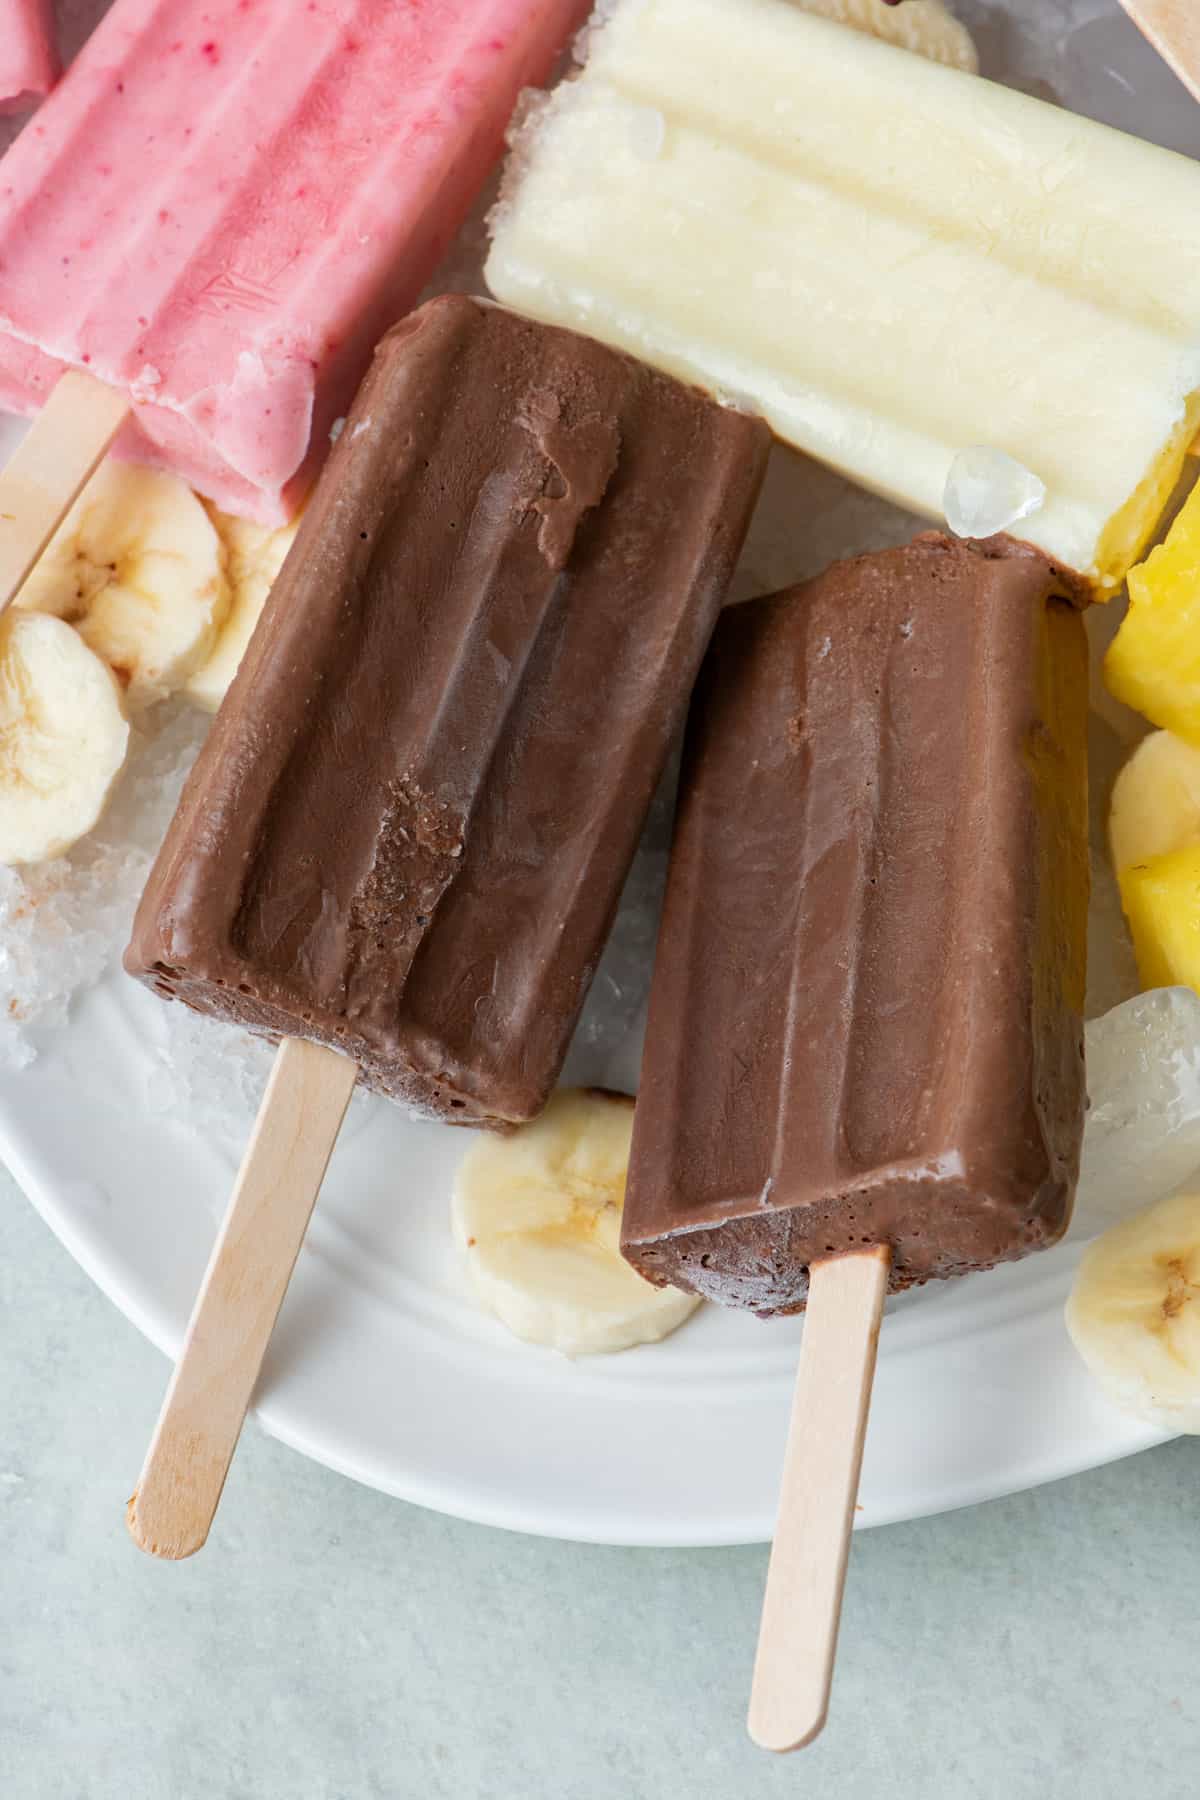 Frozen chocolate banana yogurt popsicles on a tray of ice with extra banana slices around.